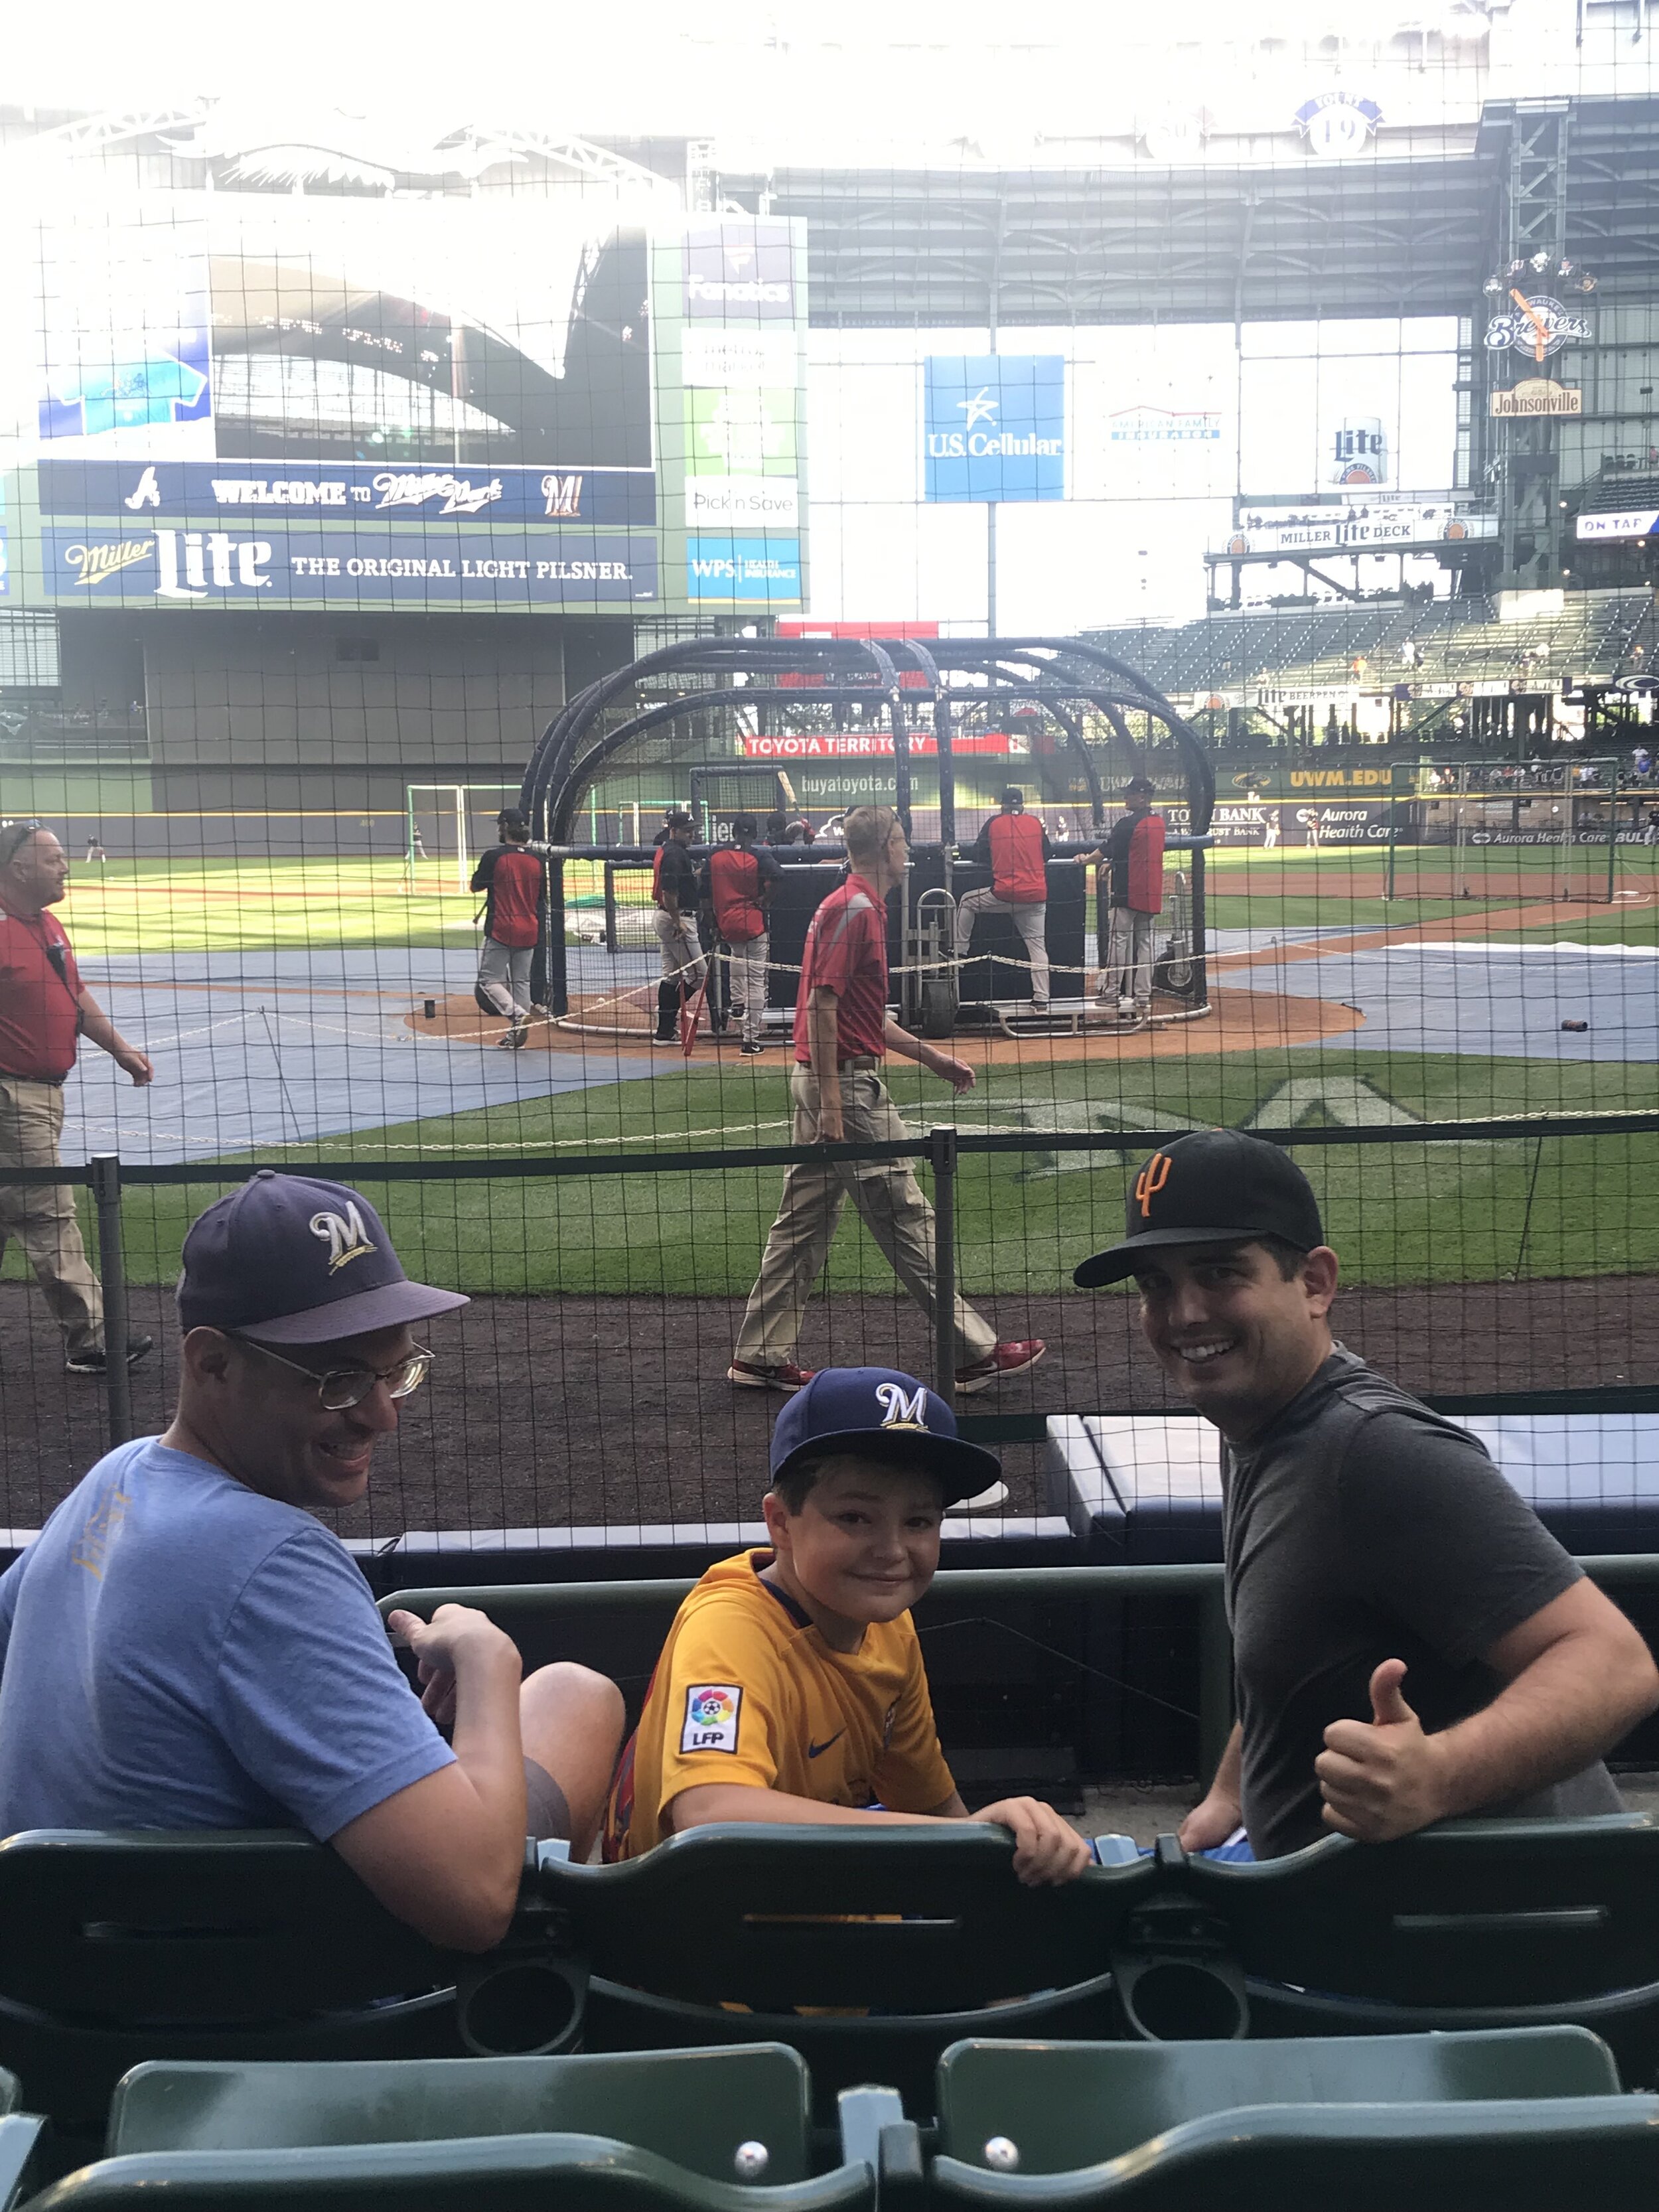 Ollie, Braden and Sam at Miller Park in Milwaukee, home of the Brewers